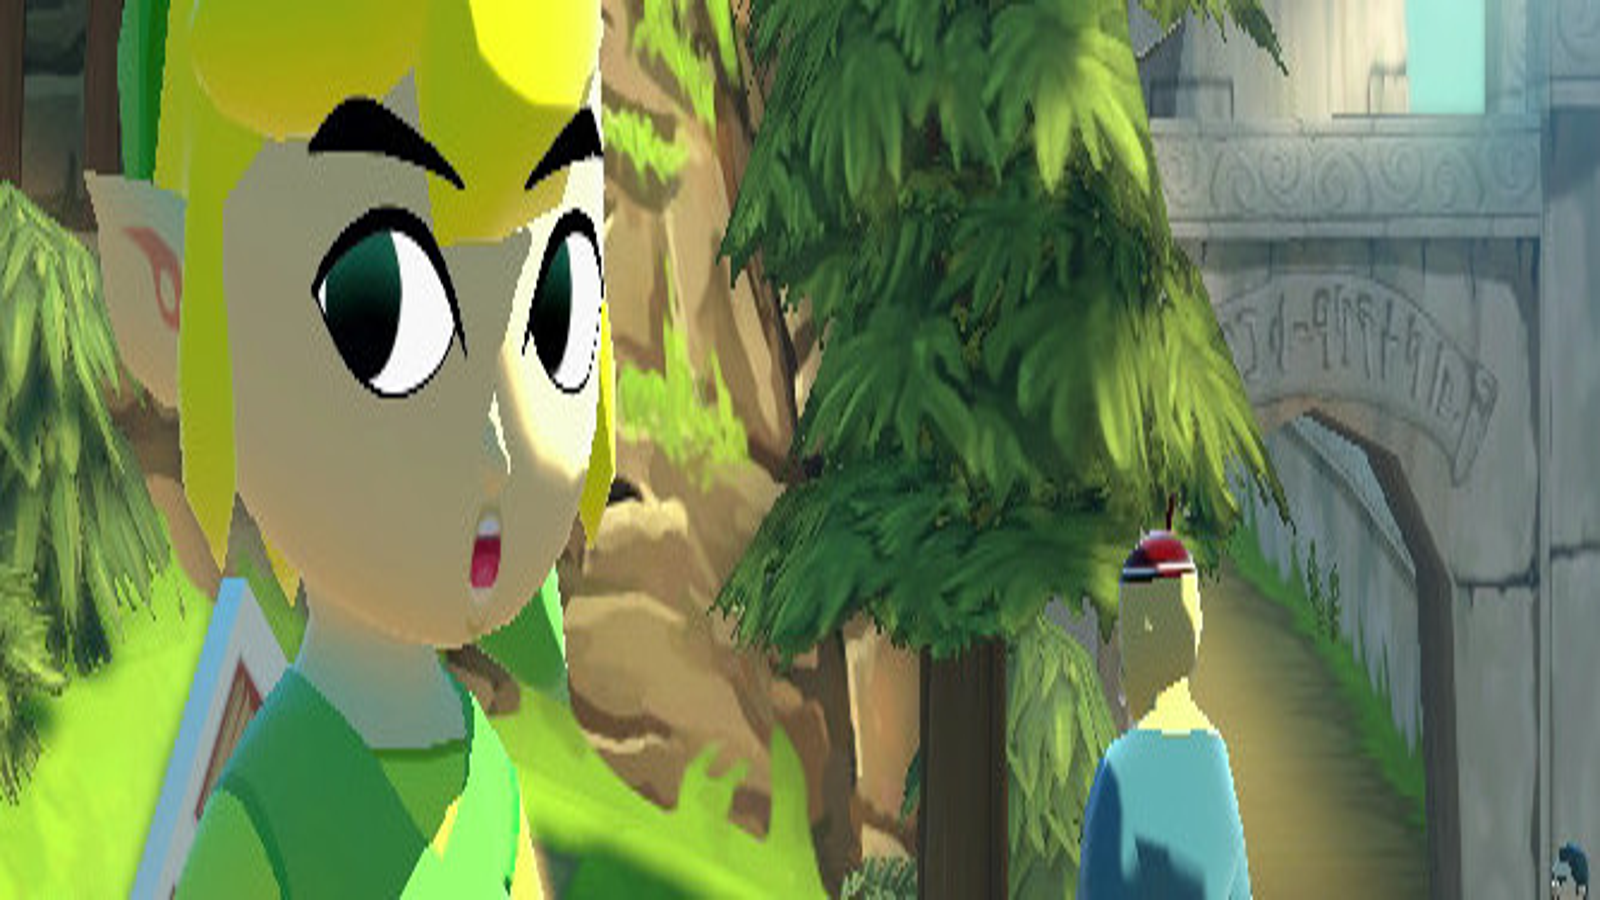 The Legend of Zelda: The Wind Waker HD Review - IGN